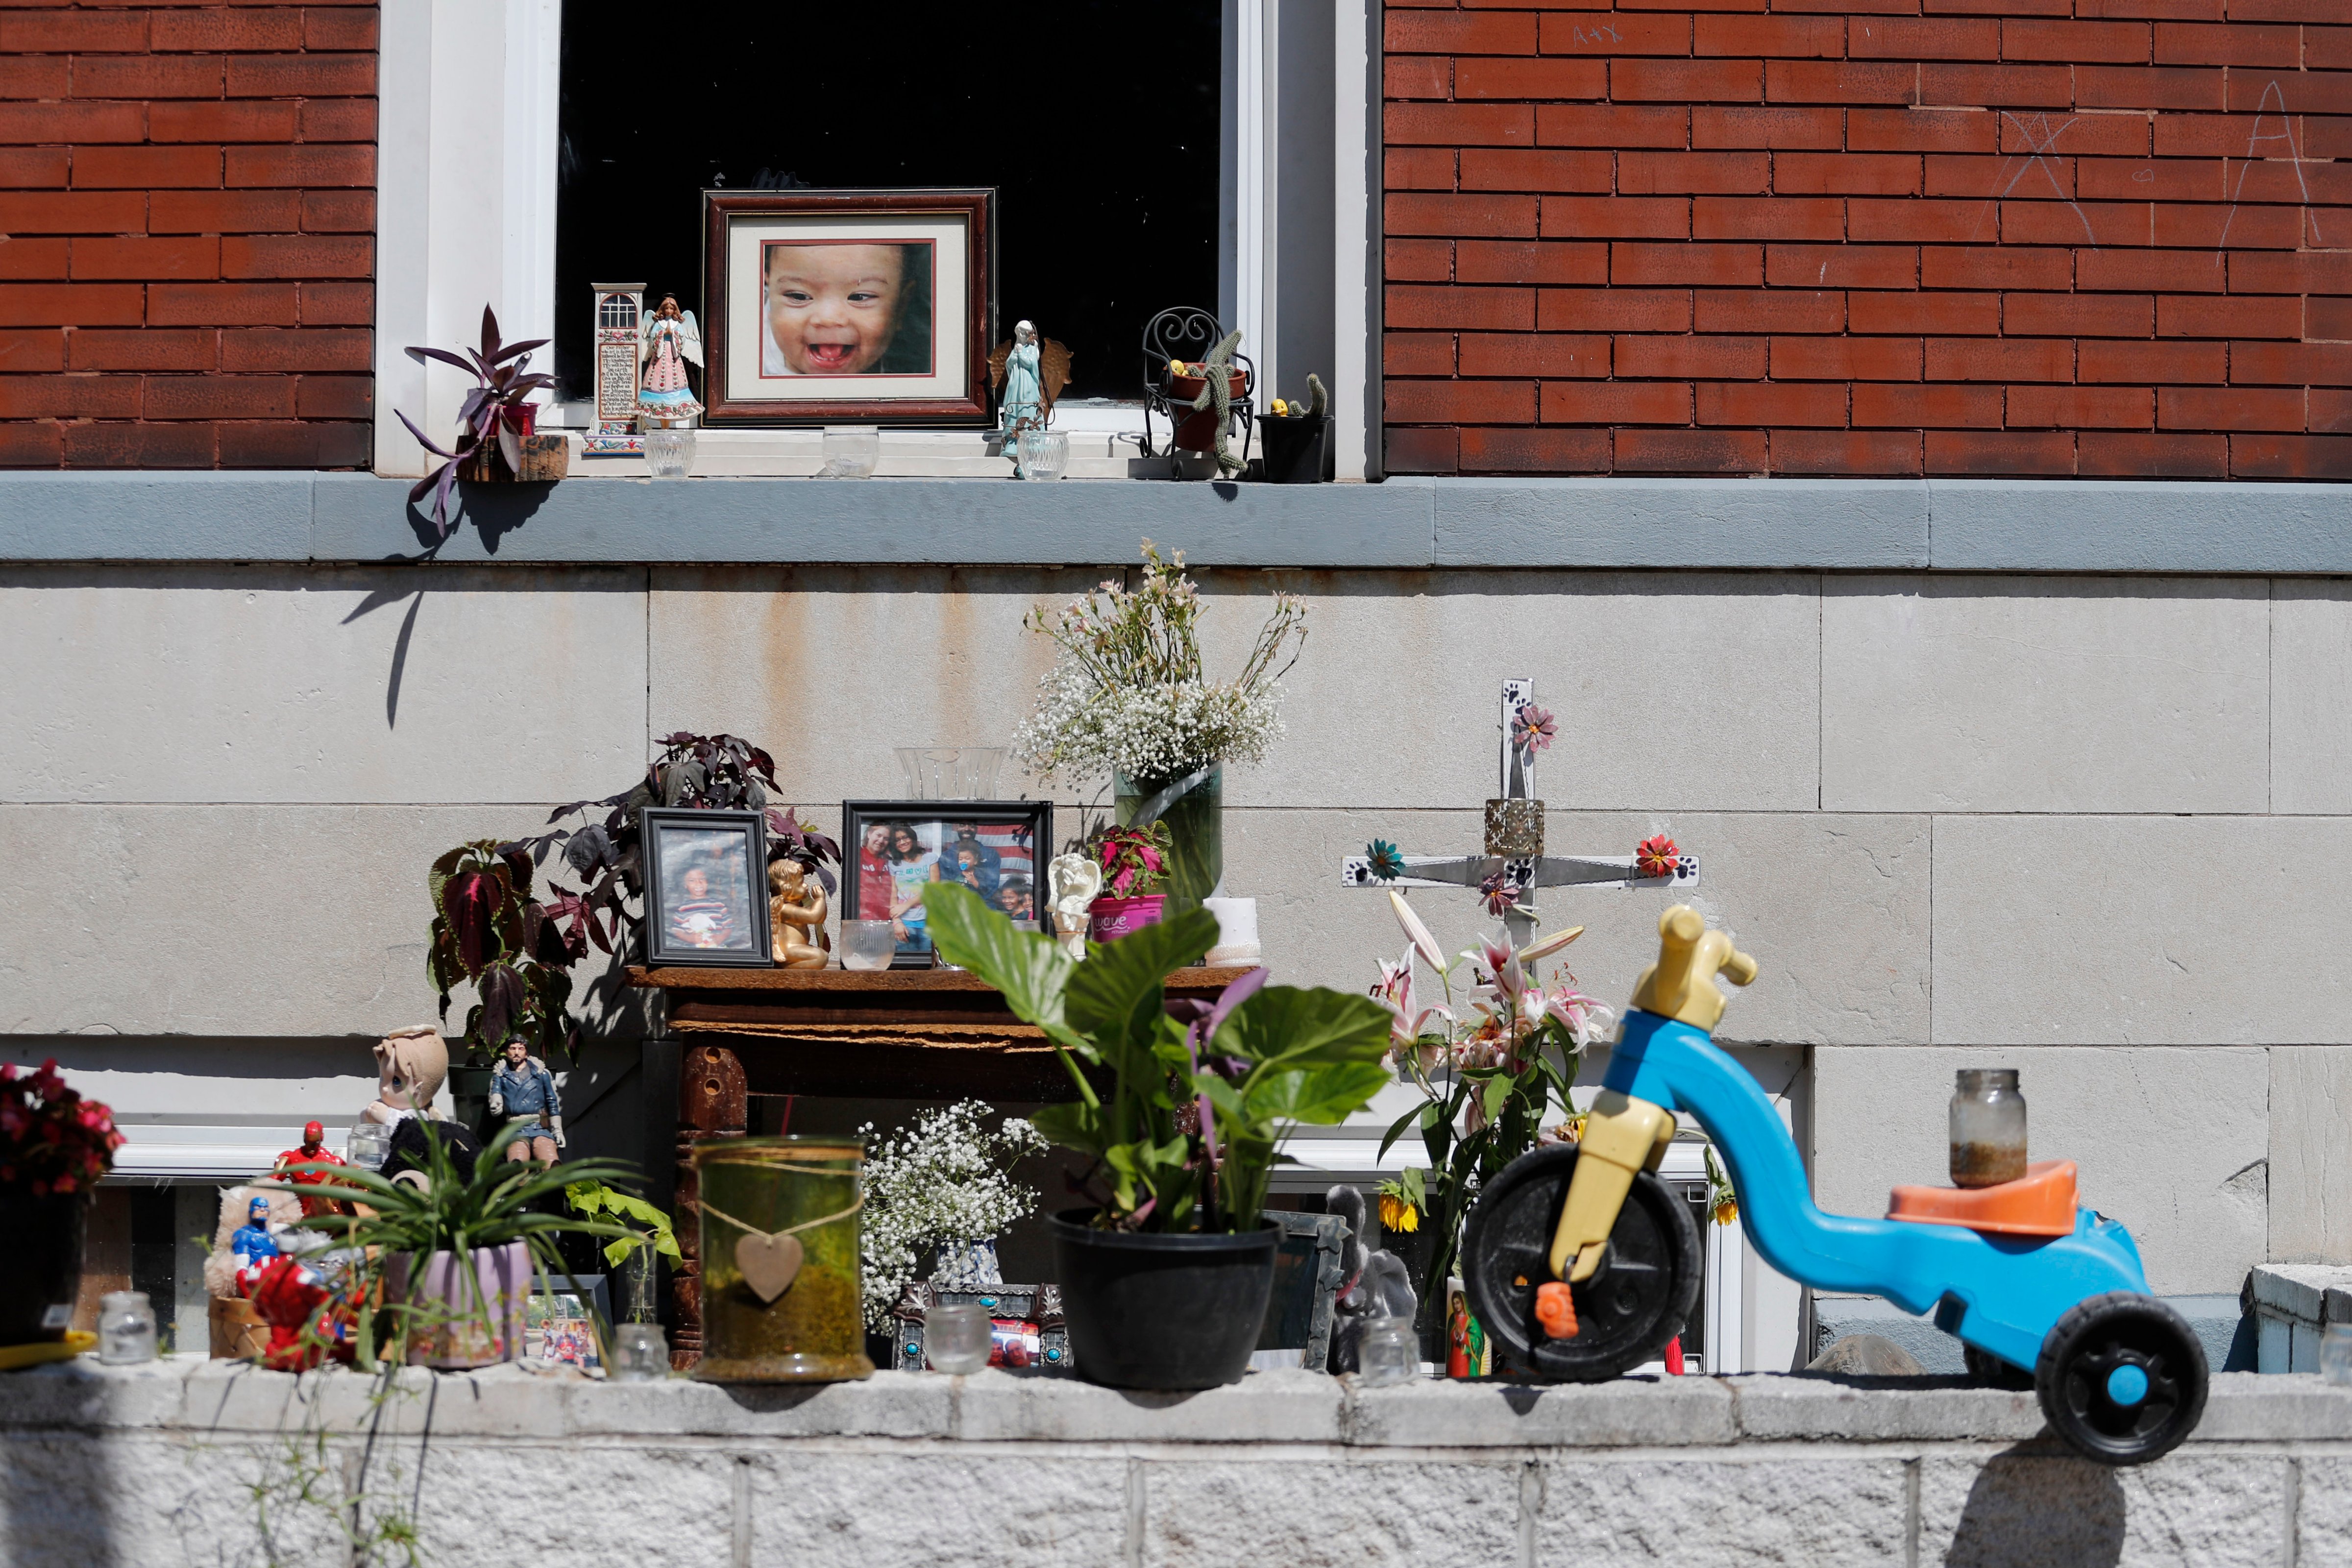 In this Wednesday, Aug. 28, 2019 photo, a memorial to Xavier Usanga, 7, who was shot and killed earlier this month while playing with his sisters in their backyard, is seen outside his home in St. Louis. Civic leaders and parents alike are desperately seeking a way to curb the gun violence that has killed at least a dozen children in the high-crime city already this year. (Jeff Roberson&mdash;AP)